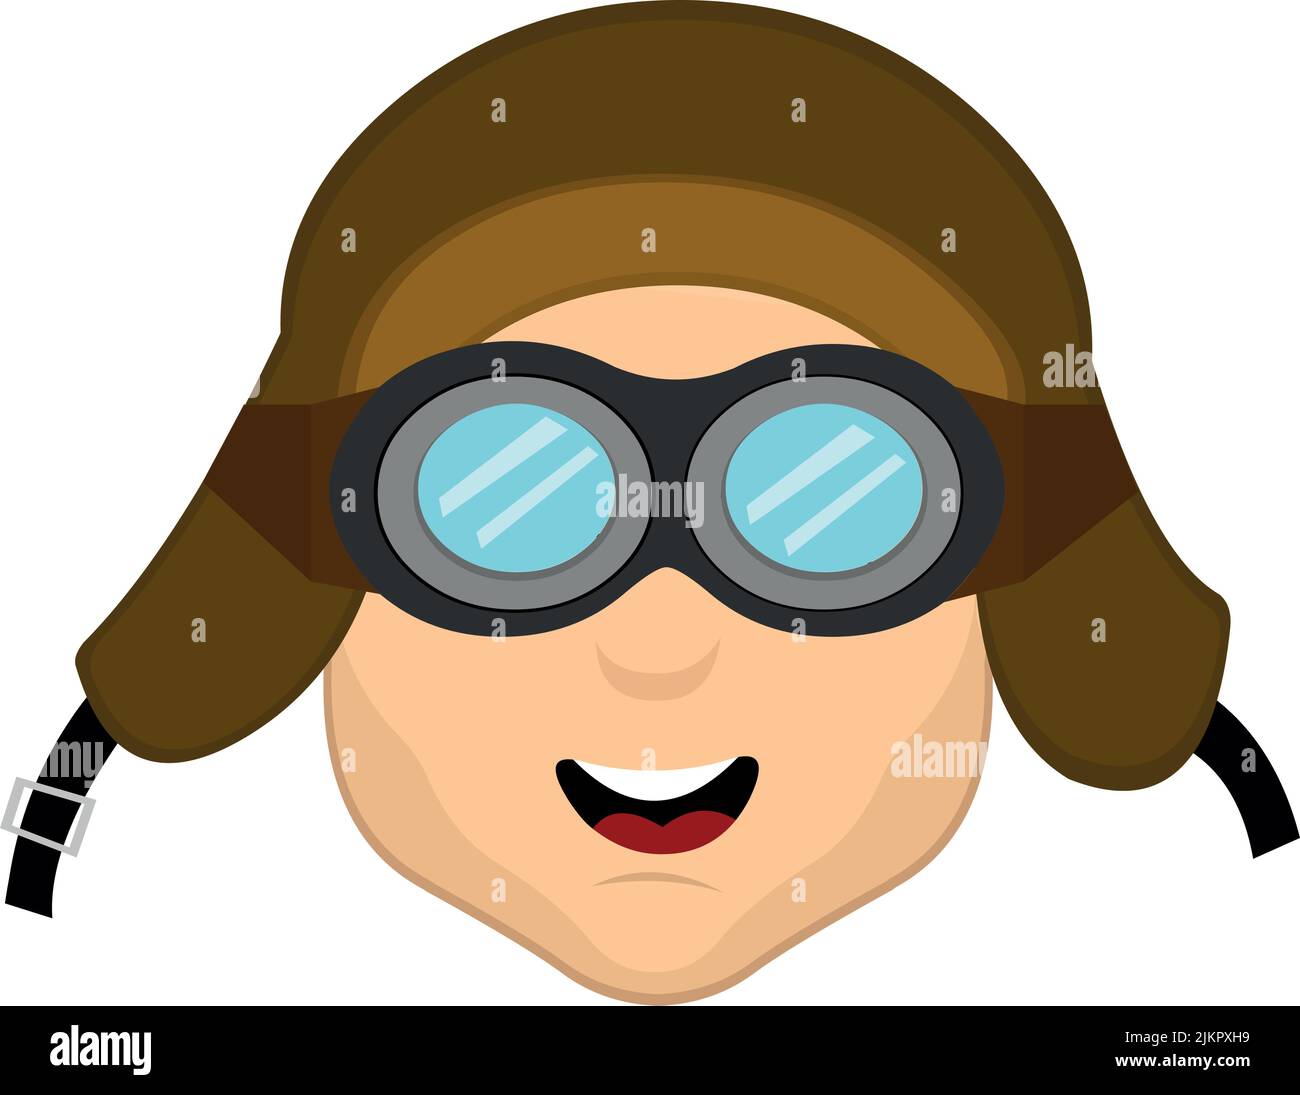 Vector illustration of the face of a cartoon character with goggles and aviator hat Stock Vector